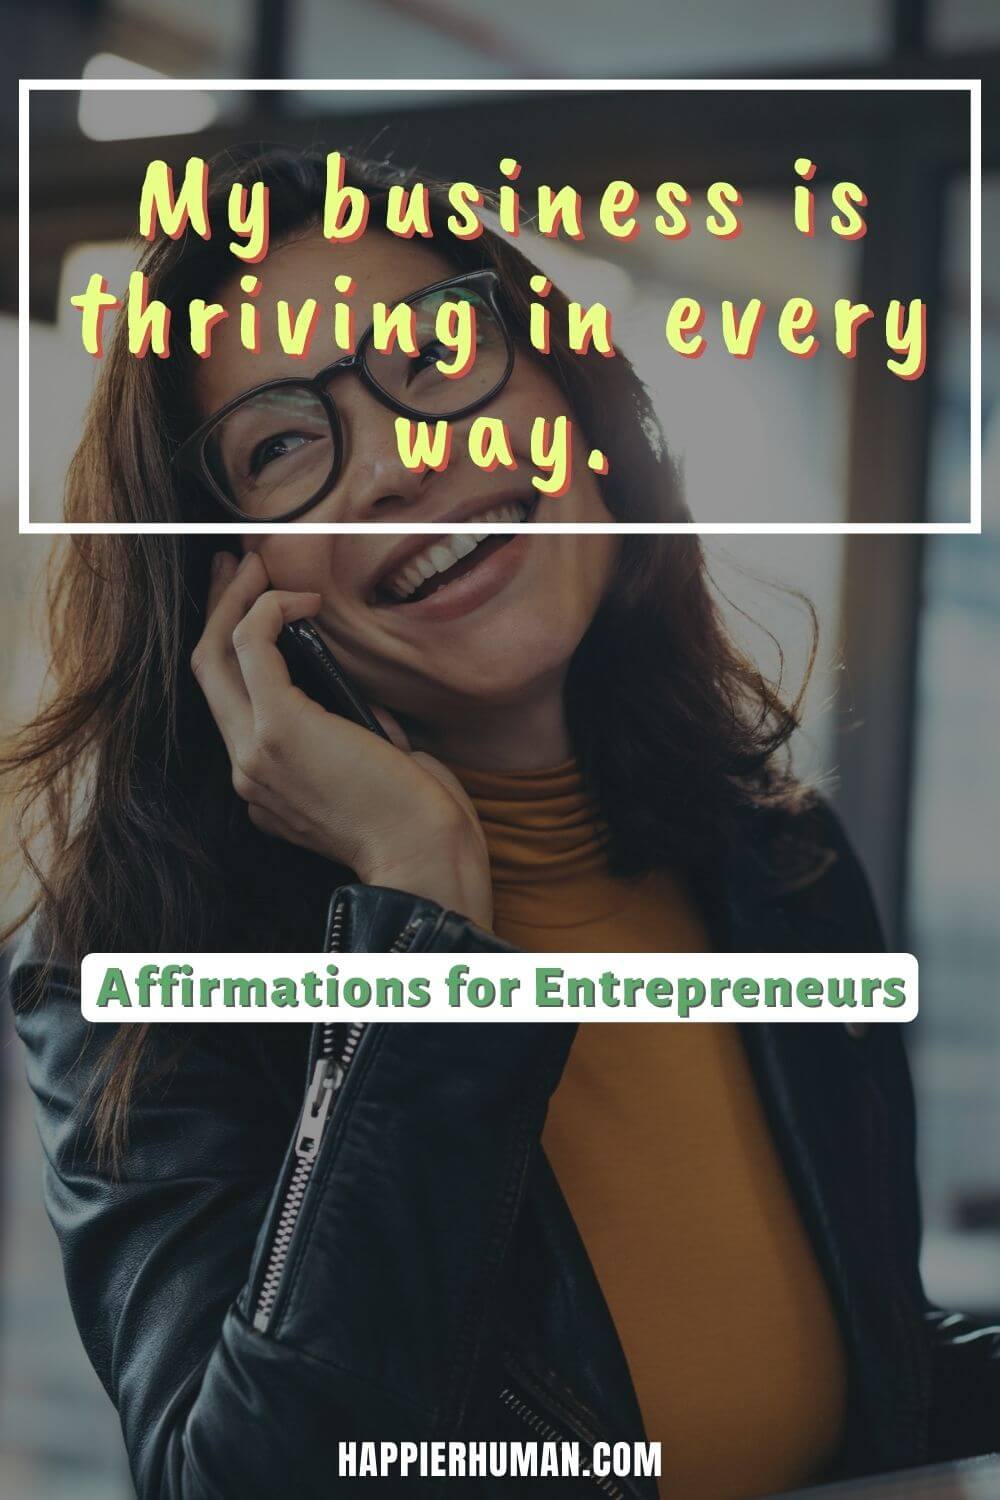 affirmations for entrepreneurs - My business is thriving in every way. | 10 affirmations for entrepreneurs | affirmations for attracting clients | affirmations for startup founders